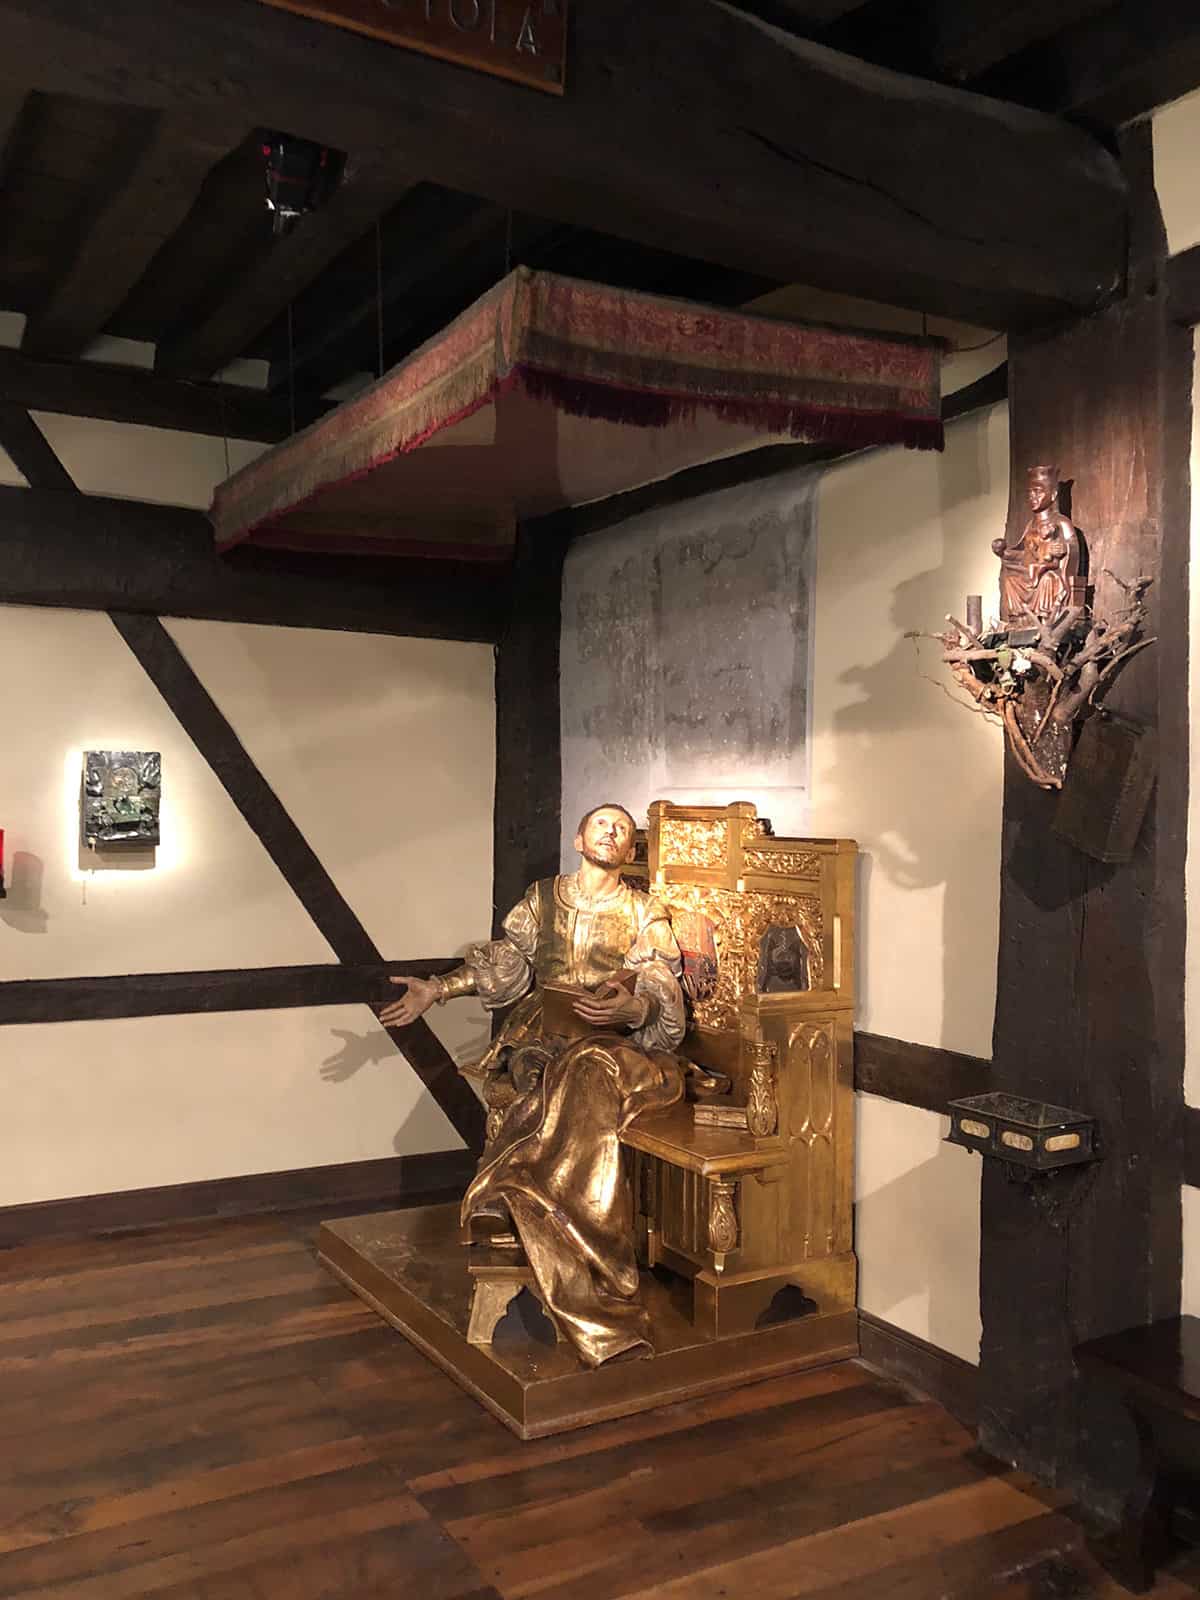 This statue of St. Ignatius is located in the conversion chapel at the castle of Loyola, the spot where he was called to conversion while reading the Life of Christ and the Lives of the Saints. Photo credit - Margie Carroll, one of our Spain pilgrims